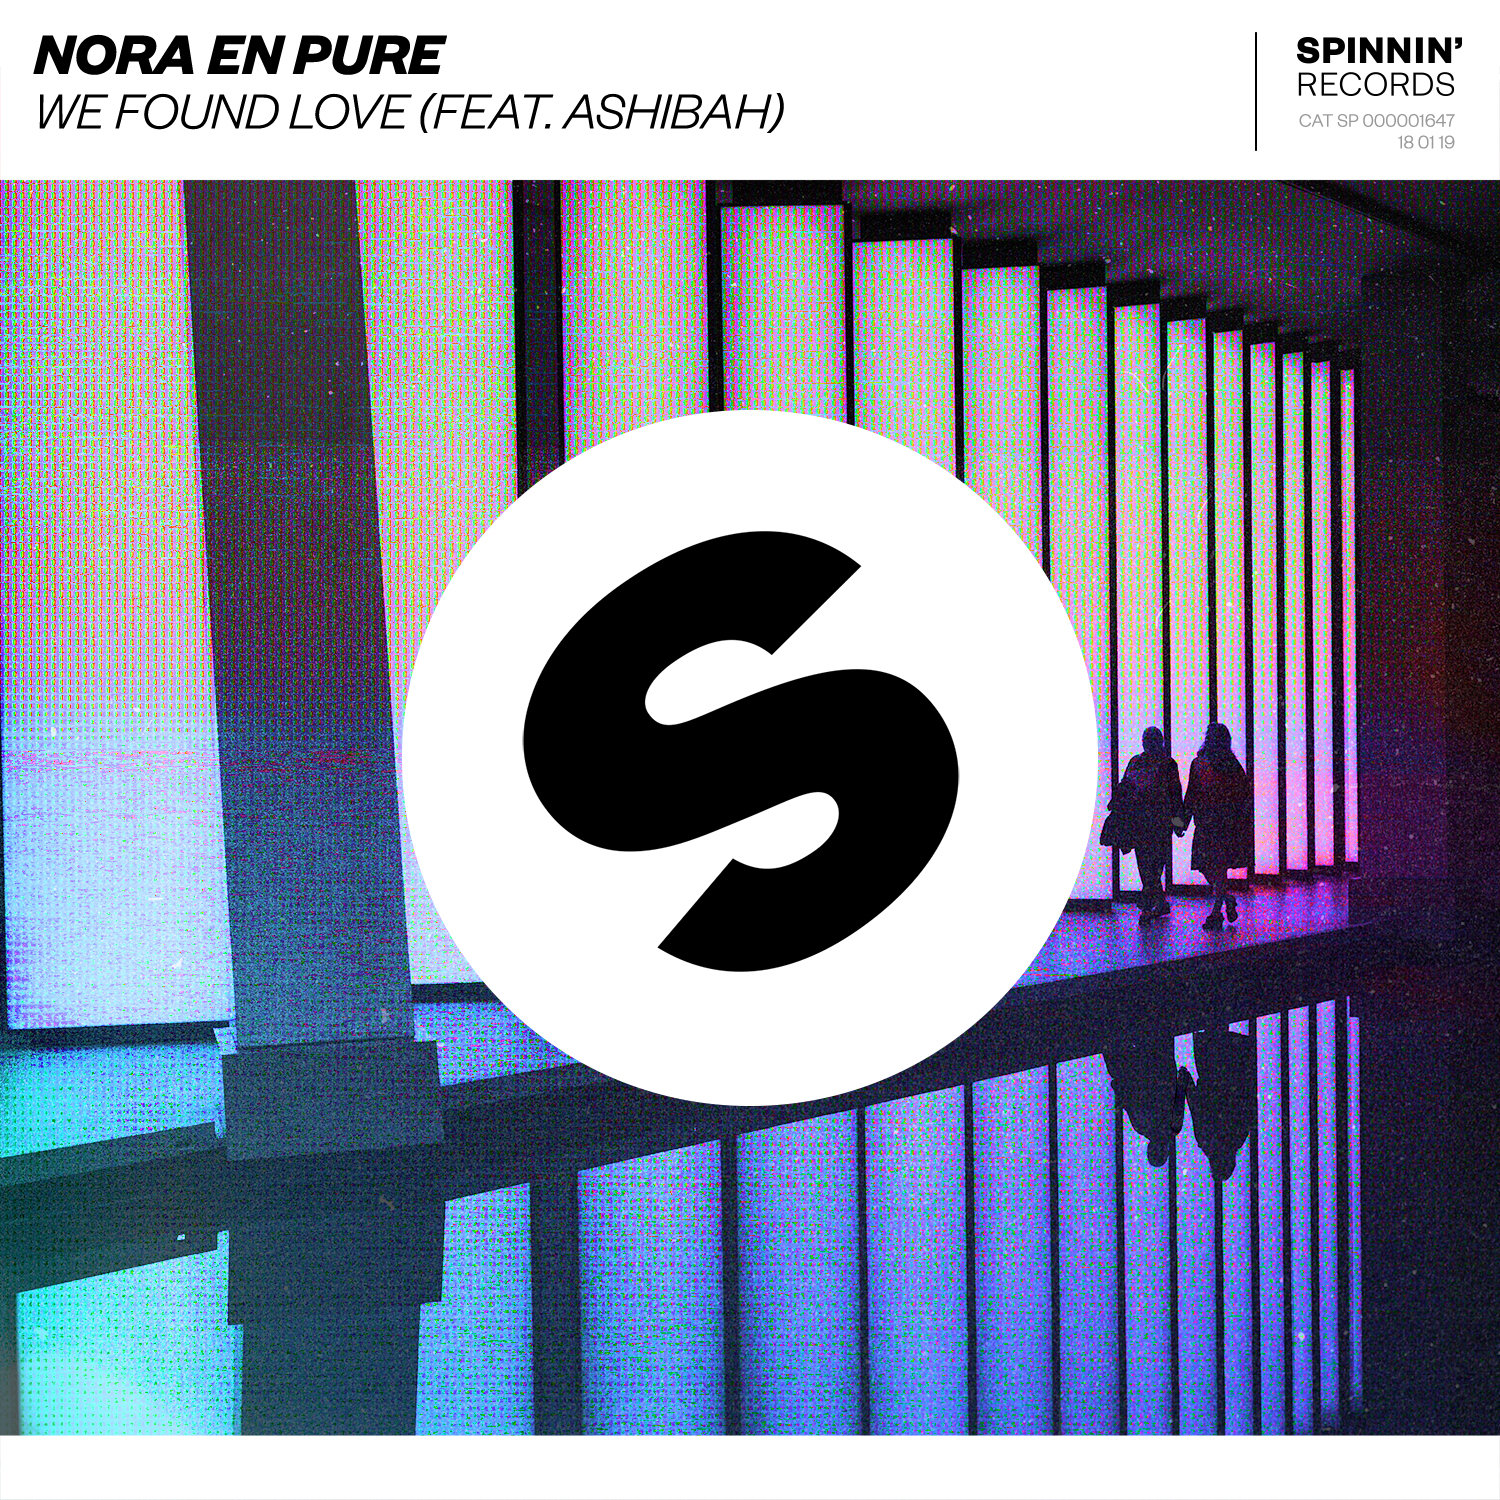 NORA EN PURE STUNS WITH 'WE FOUND LOVE' FT. ASHIBAH OUT NOW VIA SPINNIN' RECORDS